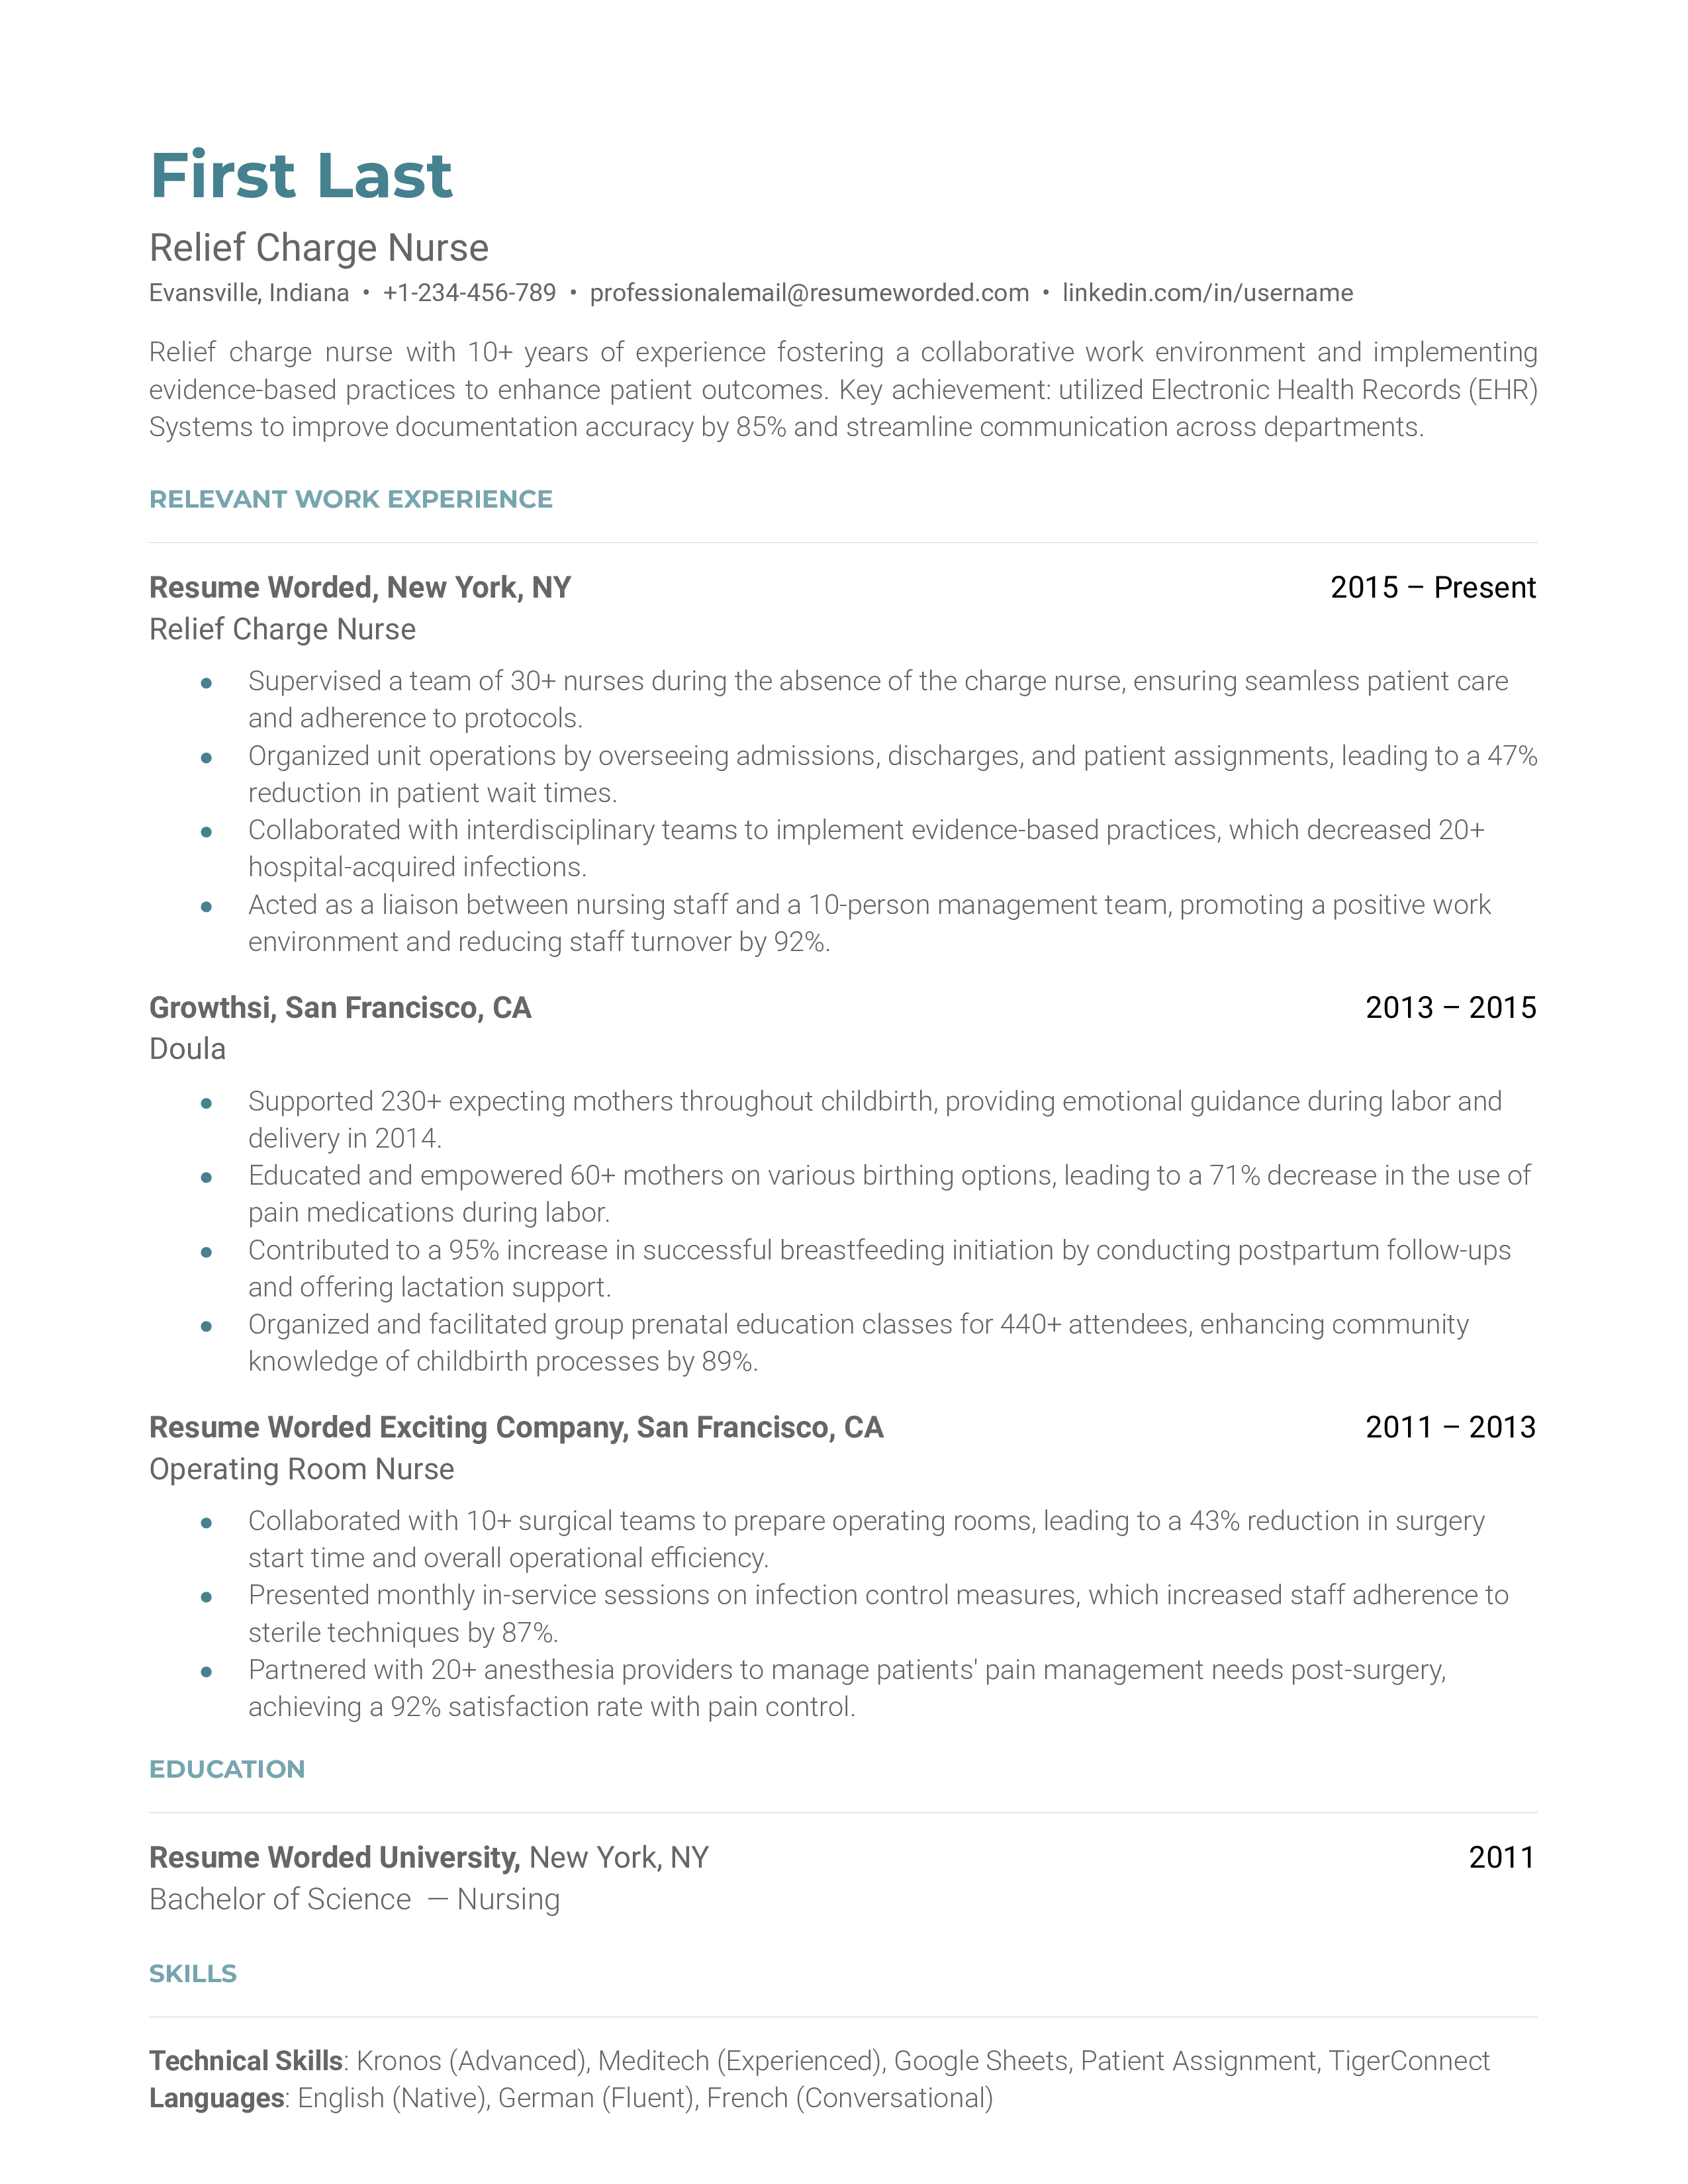 A Relief Charge Nurse's CV highlighting their certifications and diverse nursing experience.